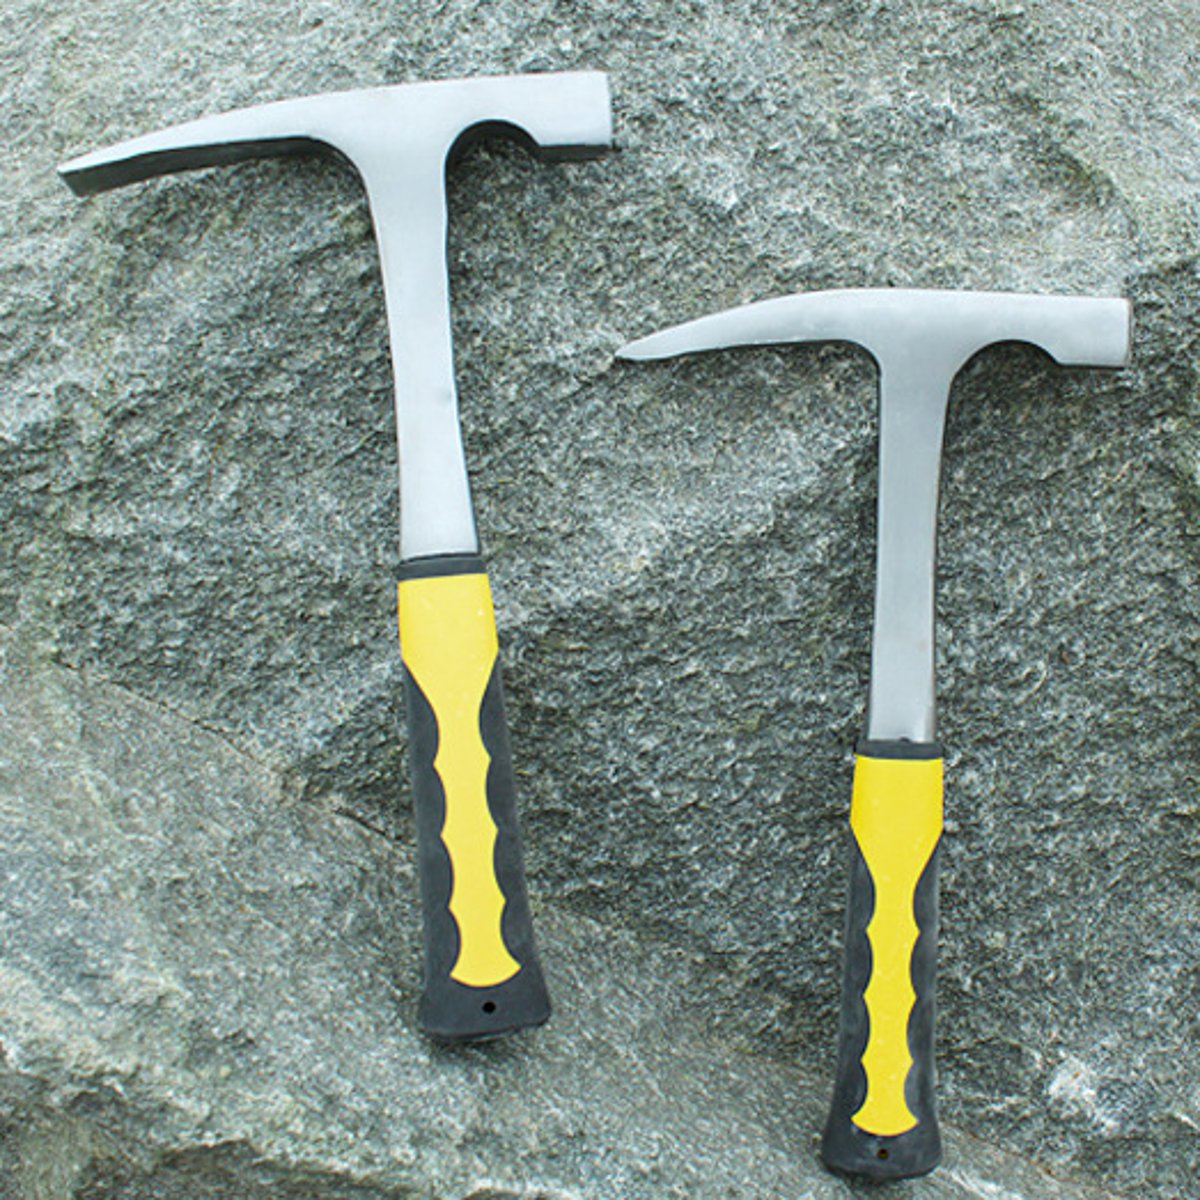 Shock-Reduction-Edge-Sharpness-Geological-Hammer-Geology-Tool-Hammers-1545586-7